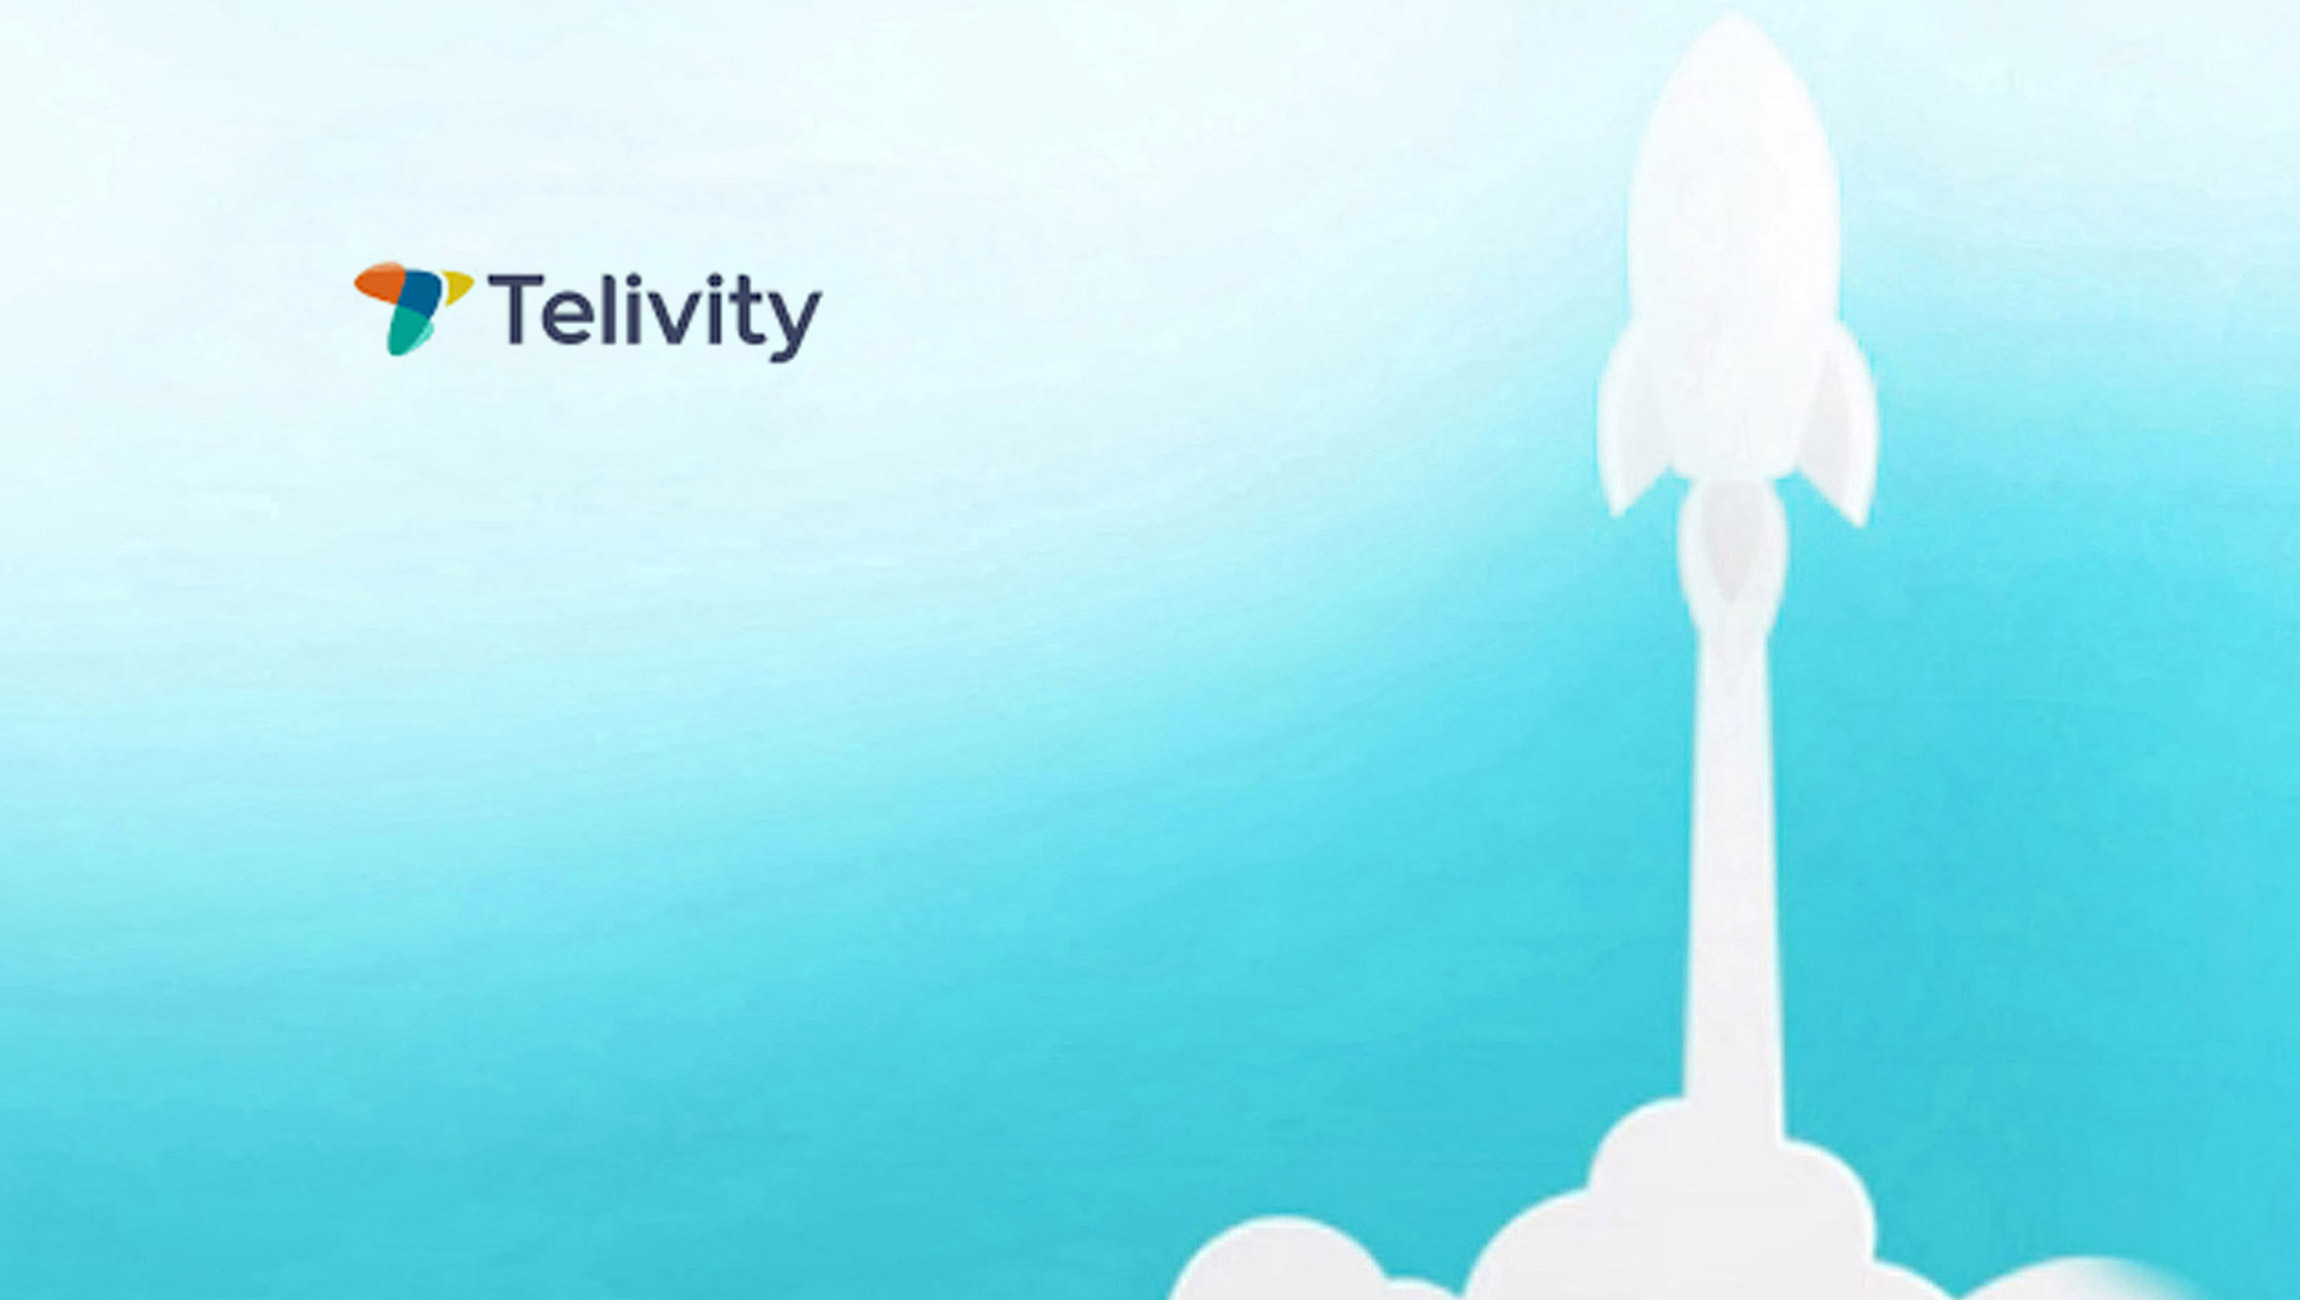 Telivity-Inc.-Launches-Centel---Its-Managed-IoT-Platform-as-a-Service